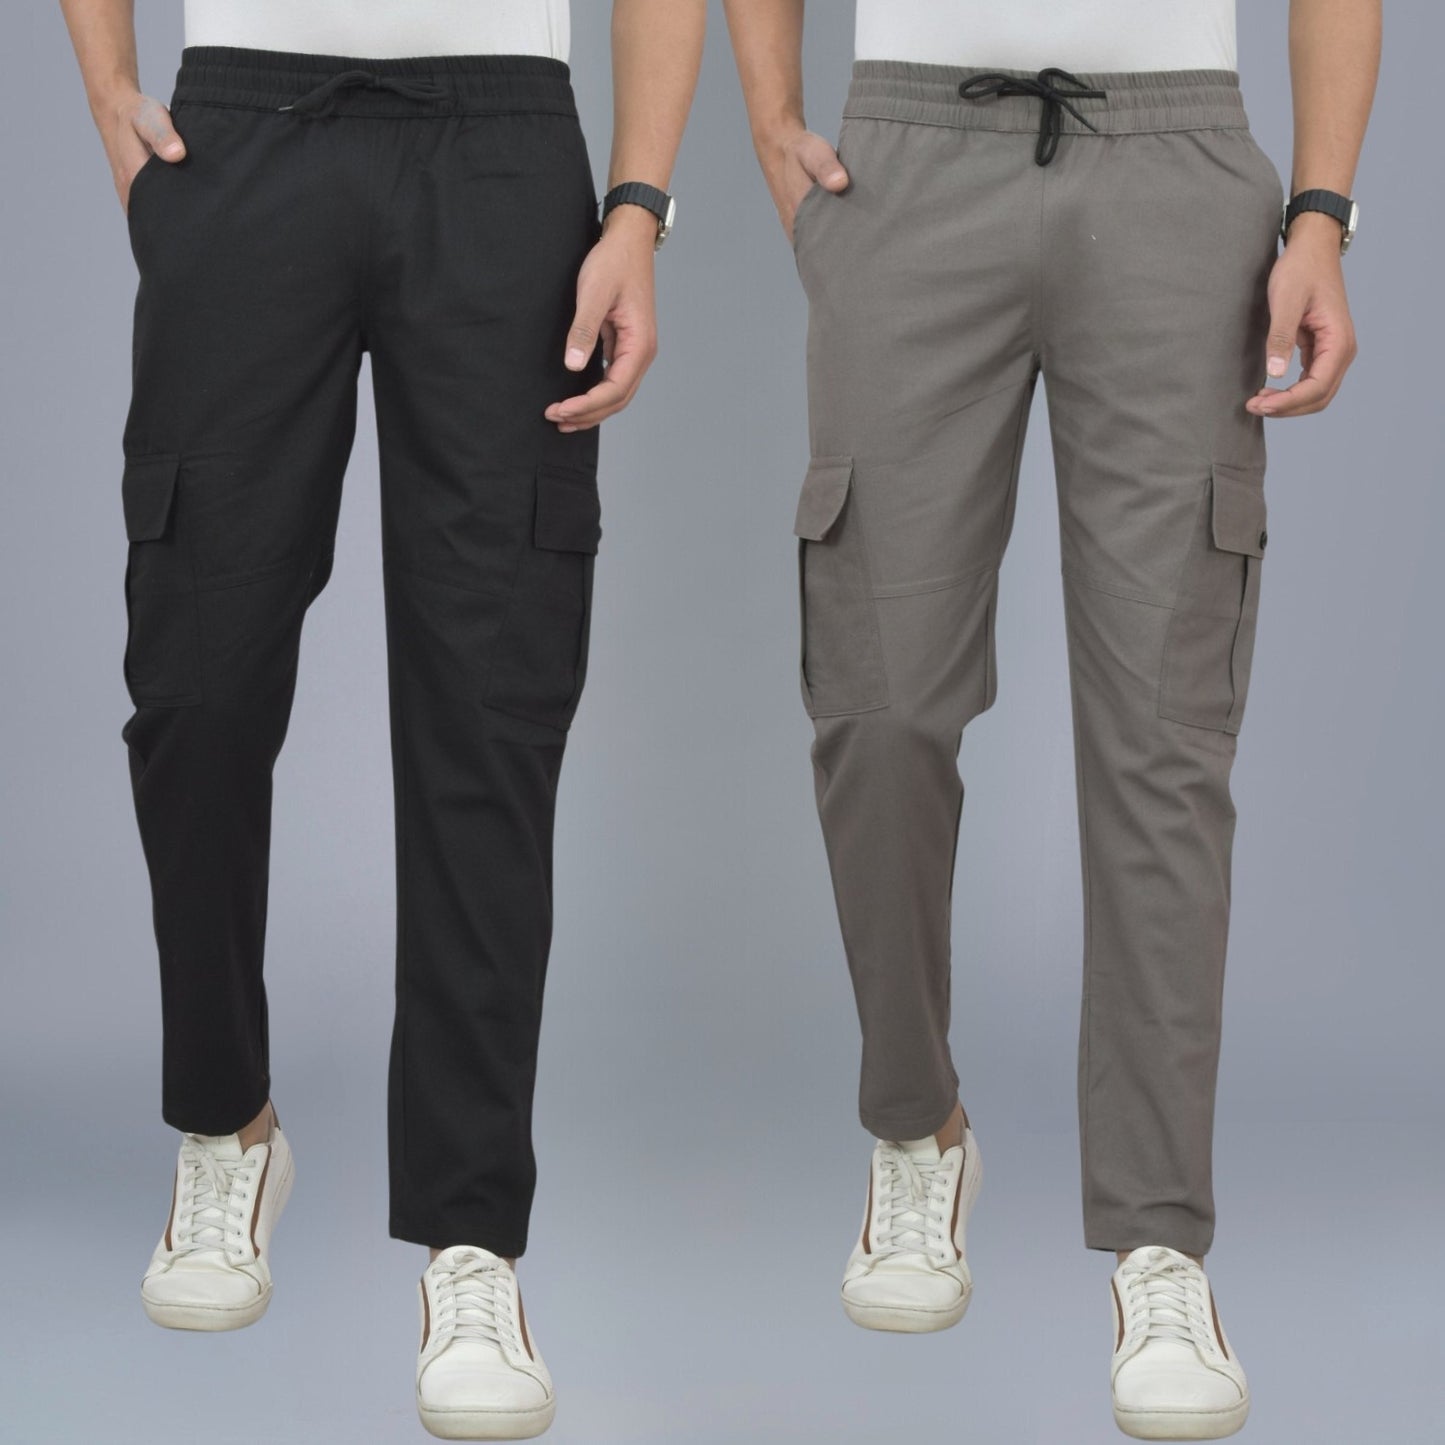 Pack Of 2 Mens Black And Grey Twill Straight Cargo Pants Combo